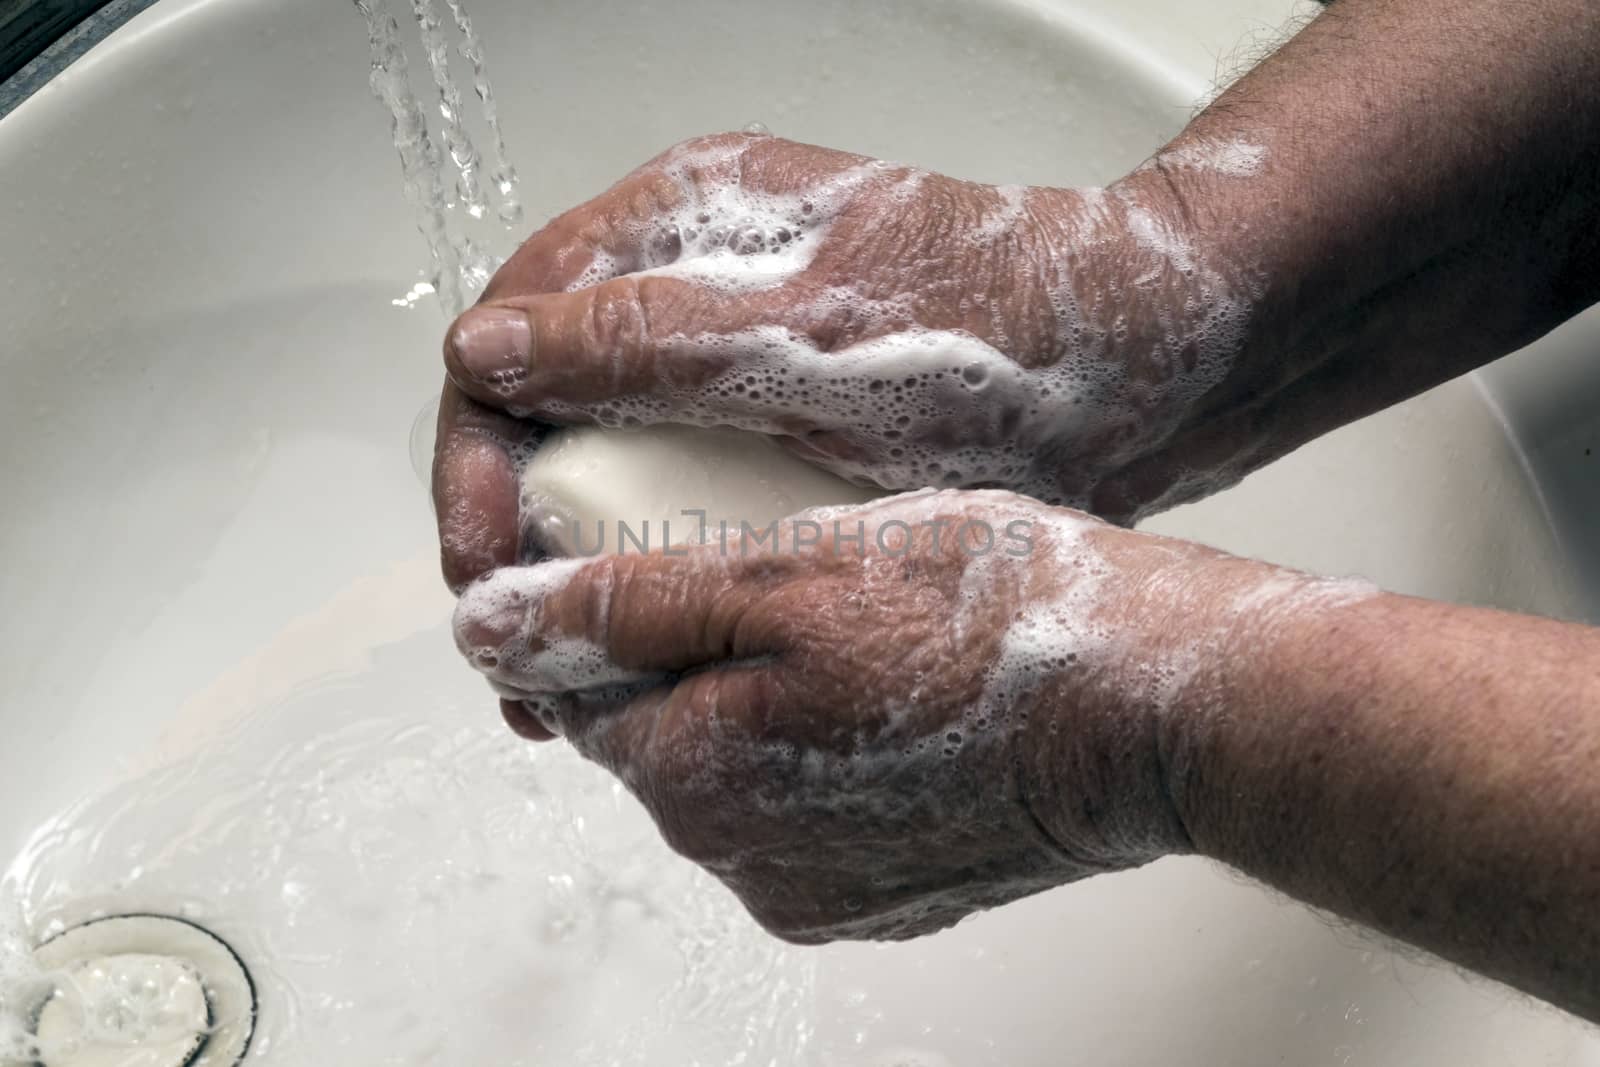 Handwashing to prevent viral infection. by dadalia